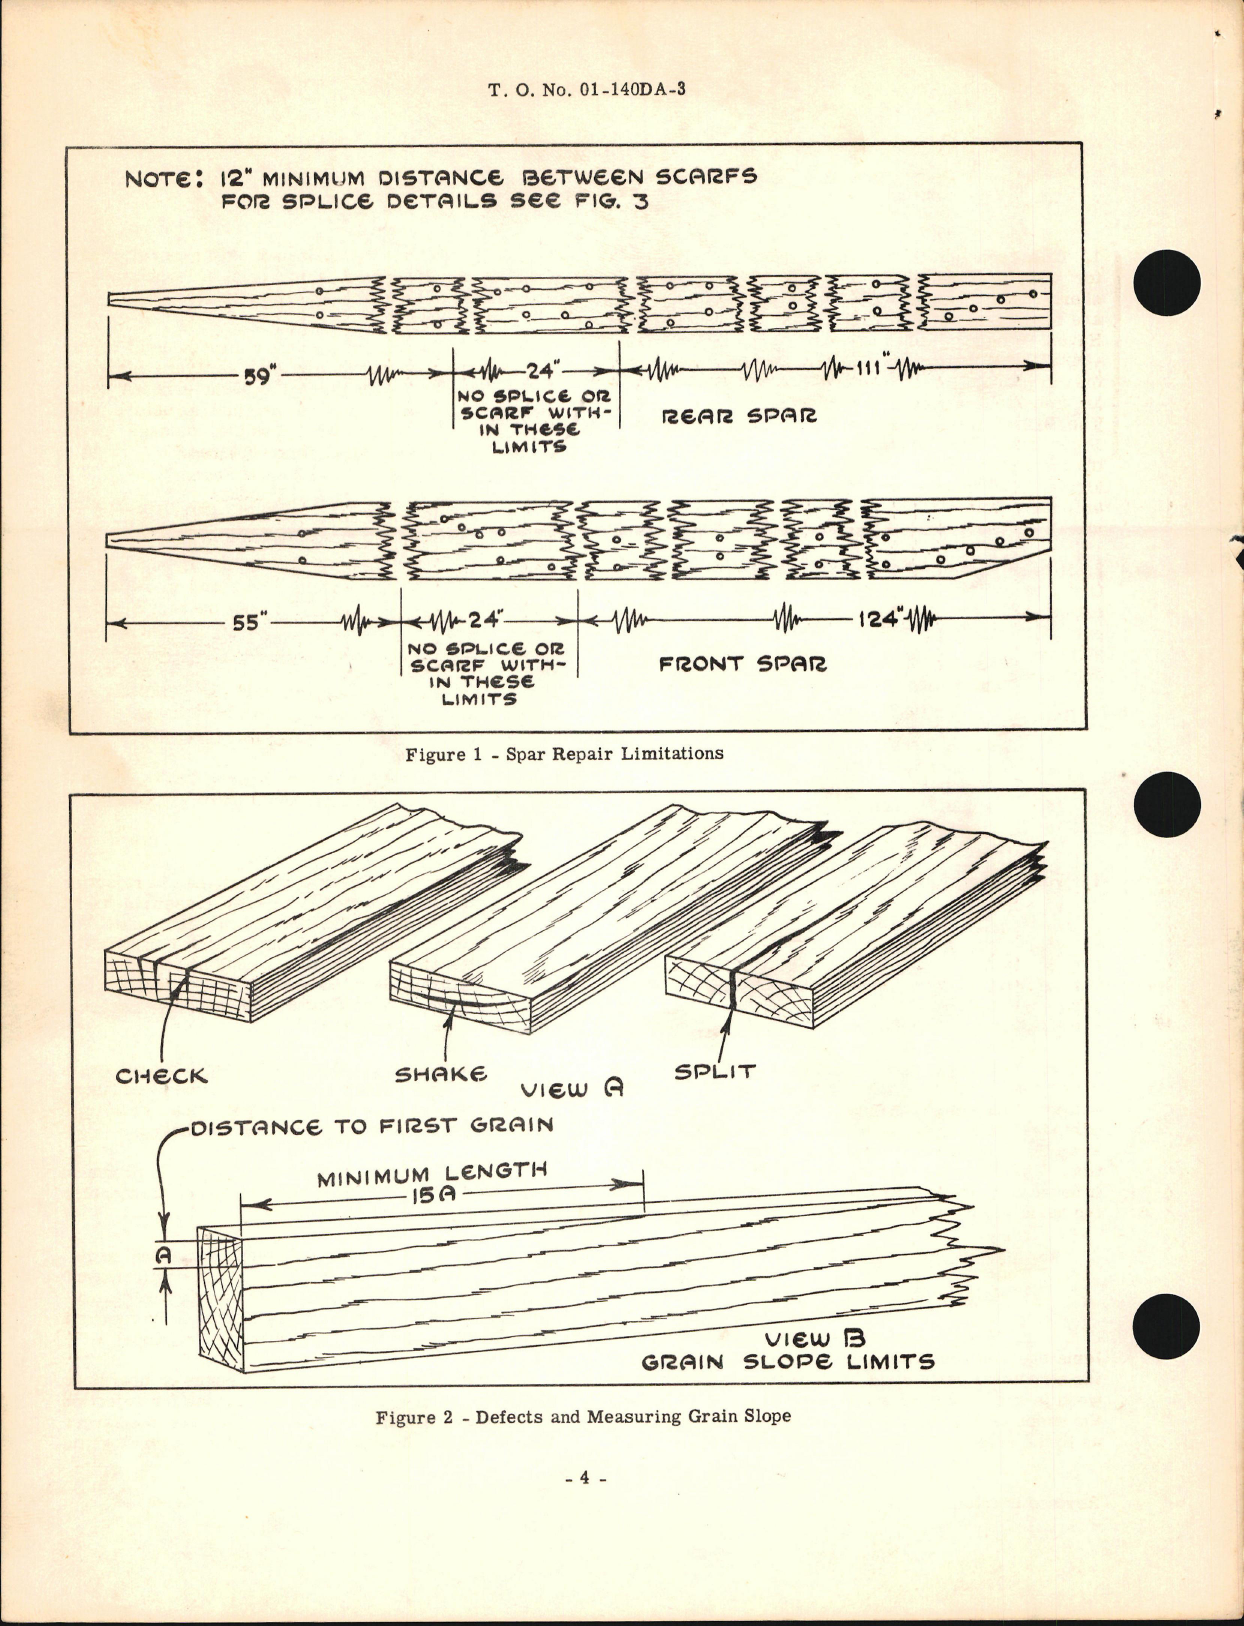 Sample page 6 from AirCorps Library document: Structural Repair Instructions for L-4 and AE-1